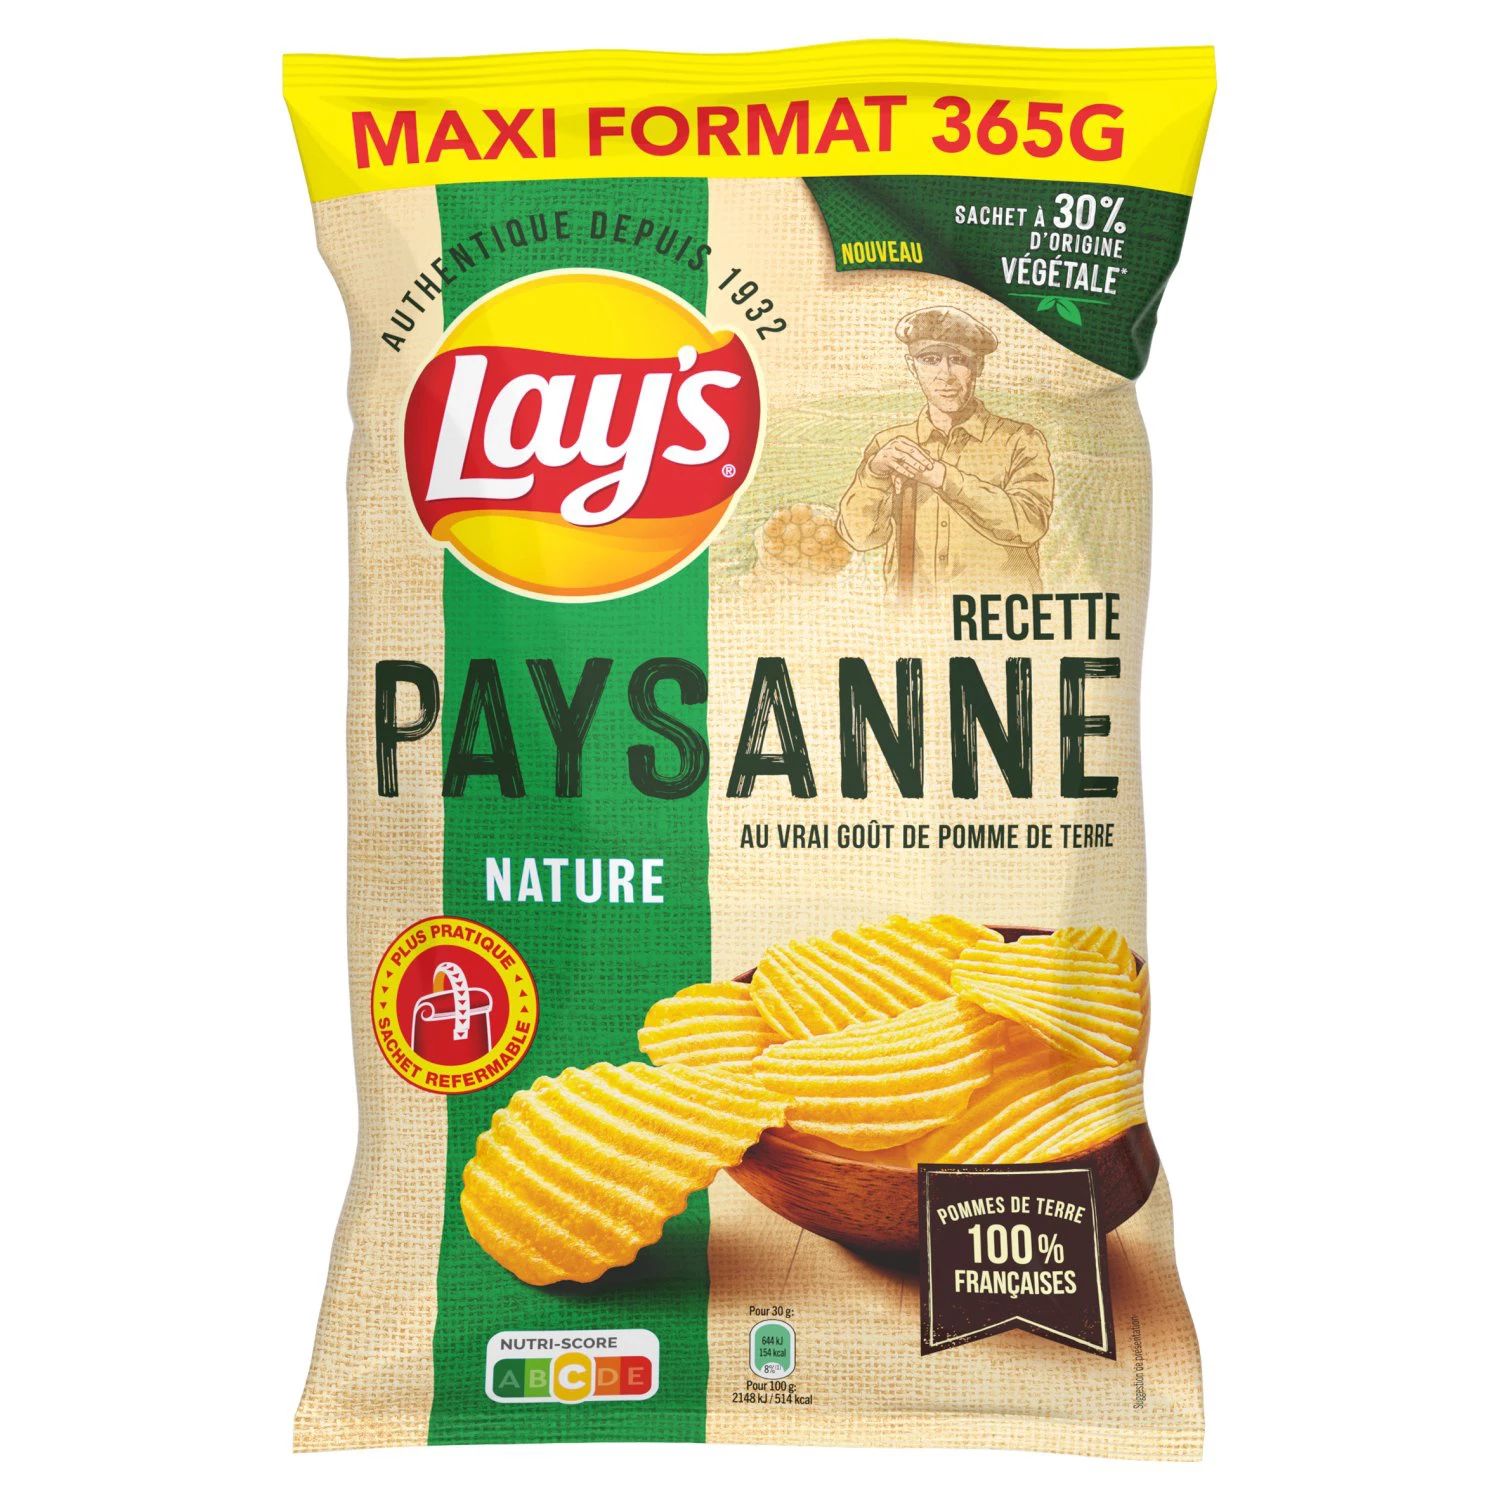 Chips Recette Paysanne Nature Maxi, 365g - LAY'S